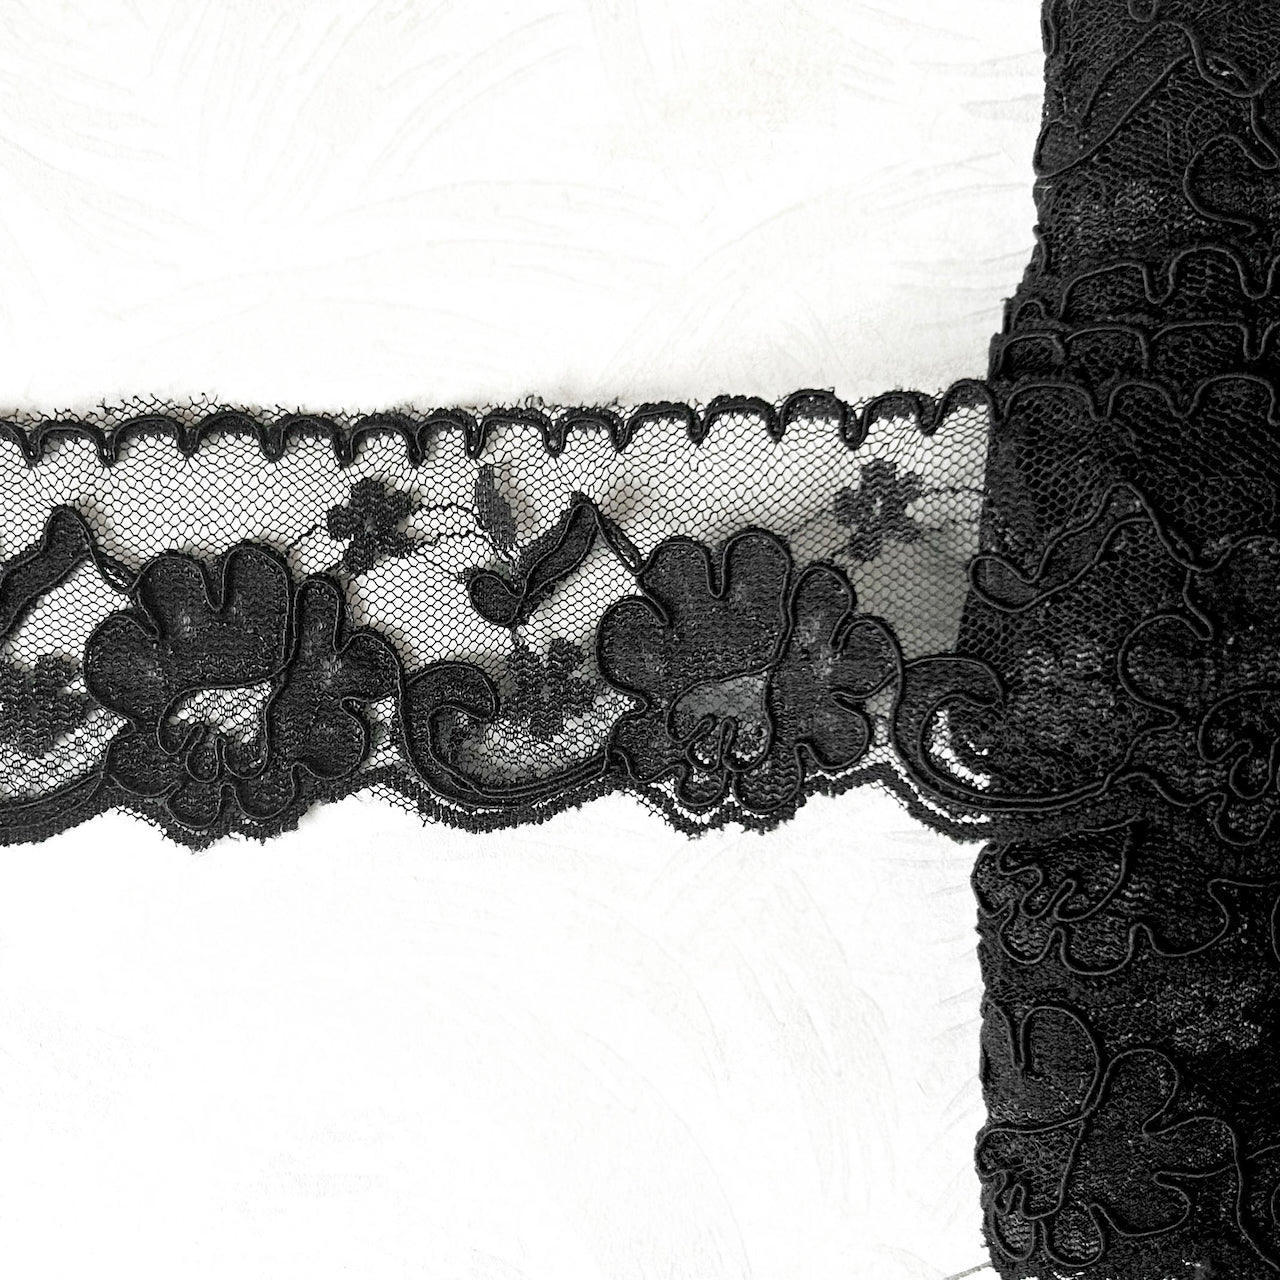 Black Sheer Lace Trimming - 3.25